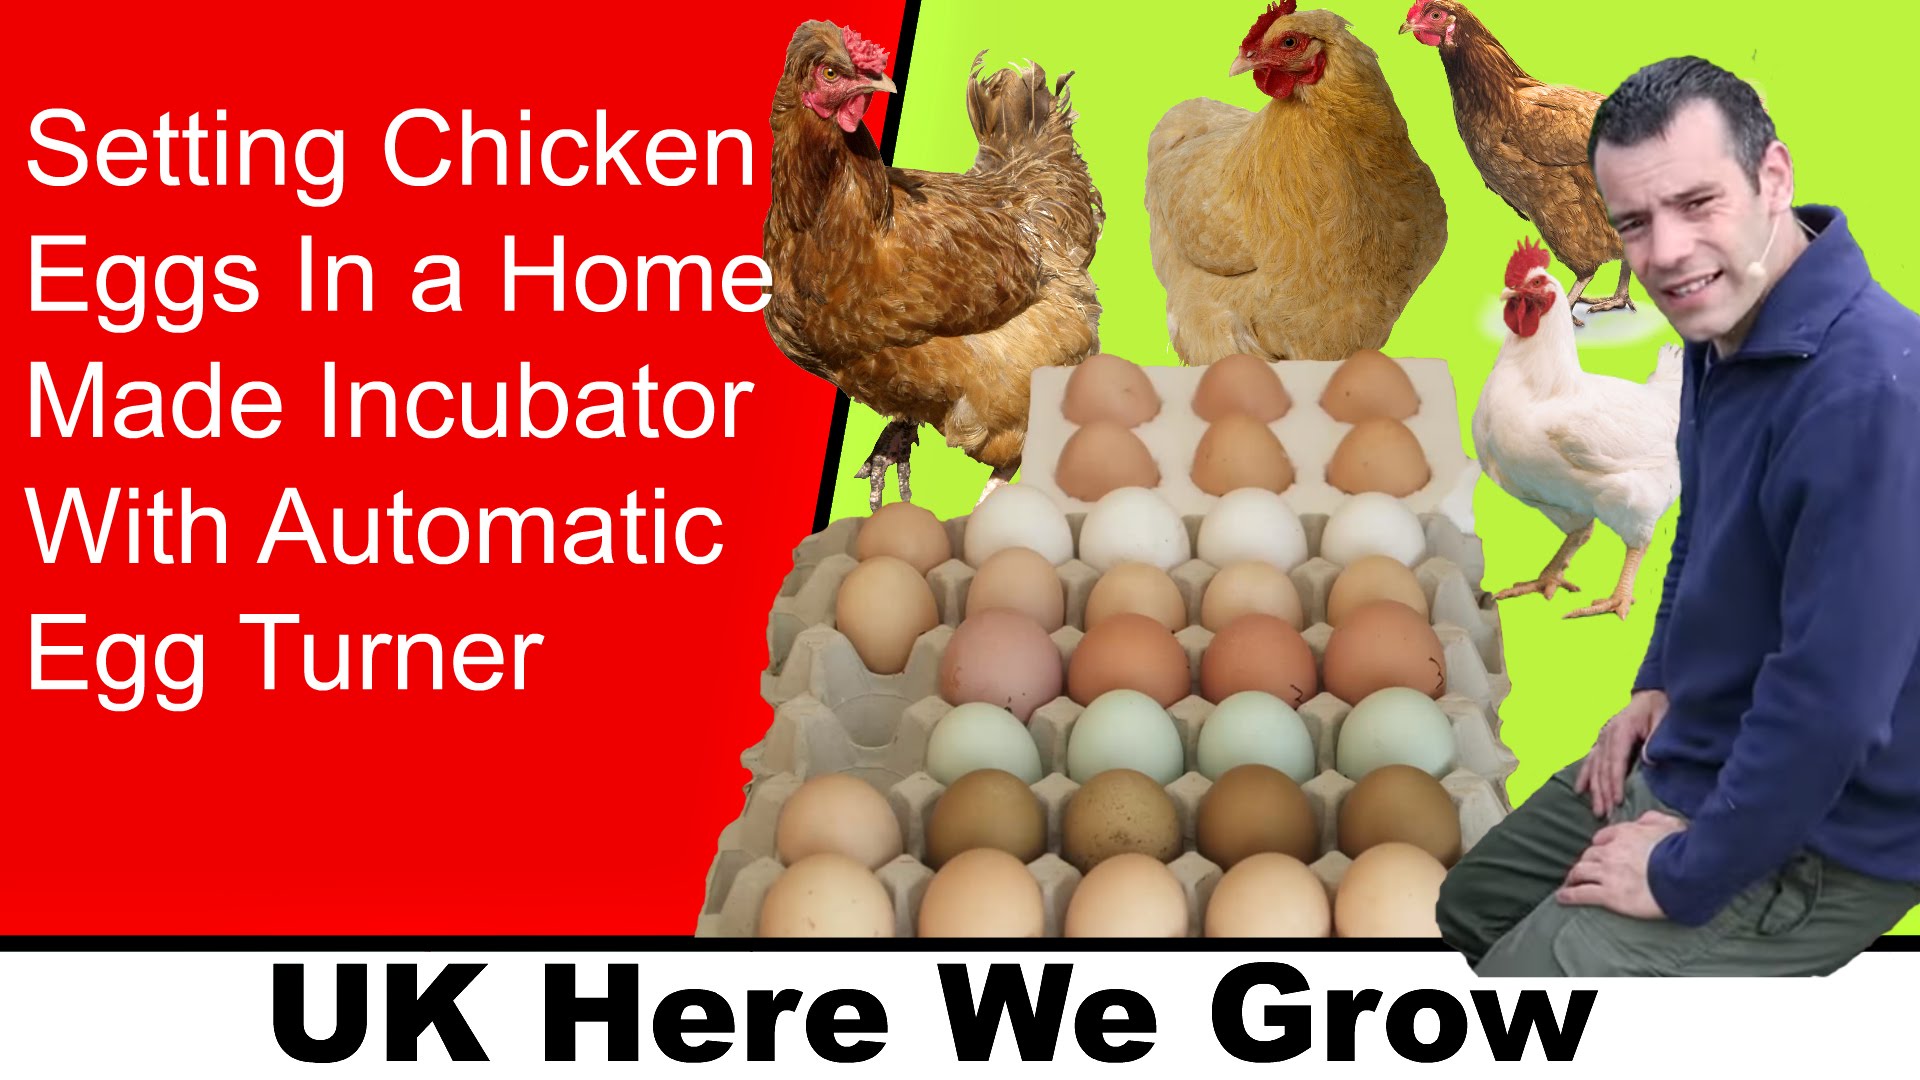 Setting Chicken Eggs In a Home Made Incubator With Automatic Egg Turner